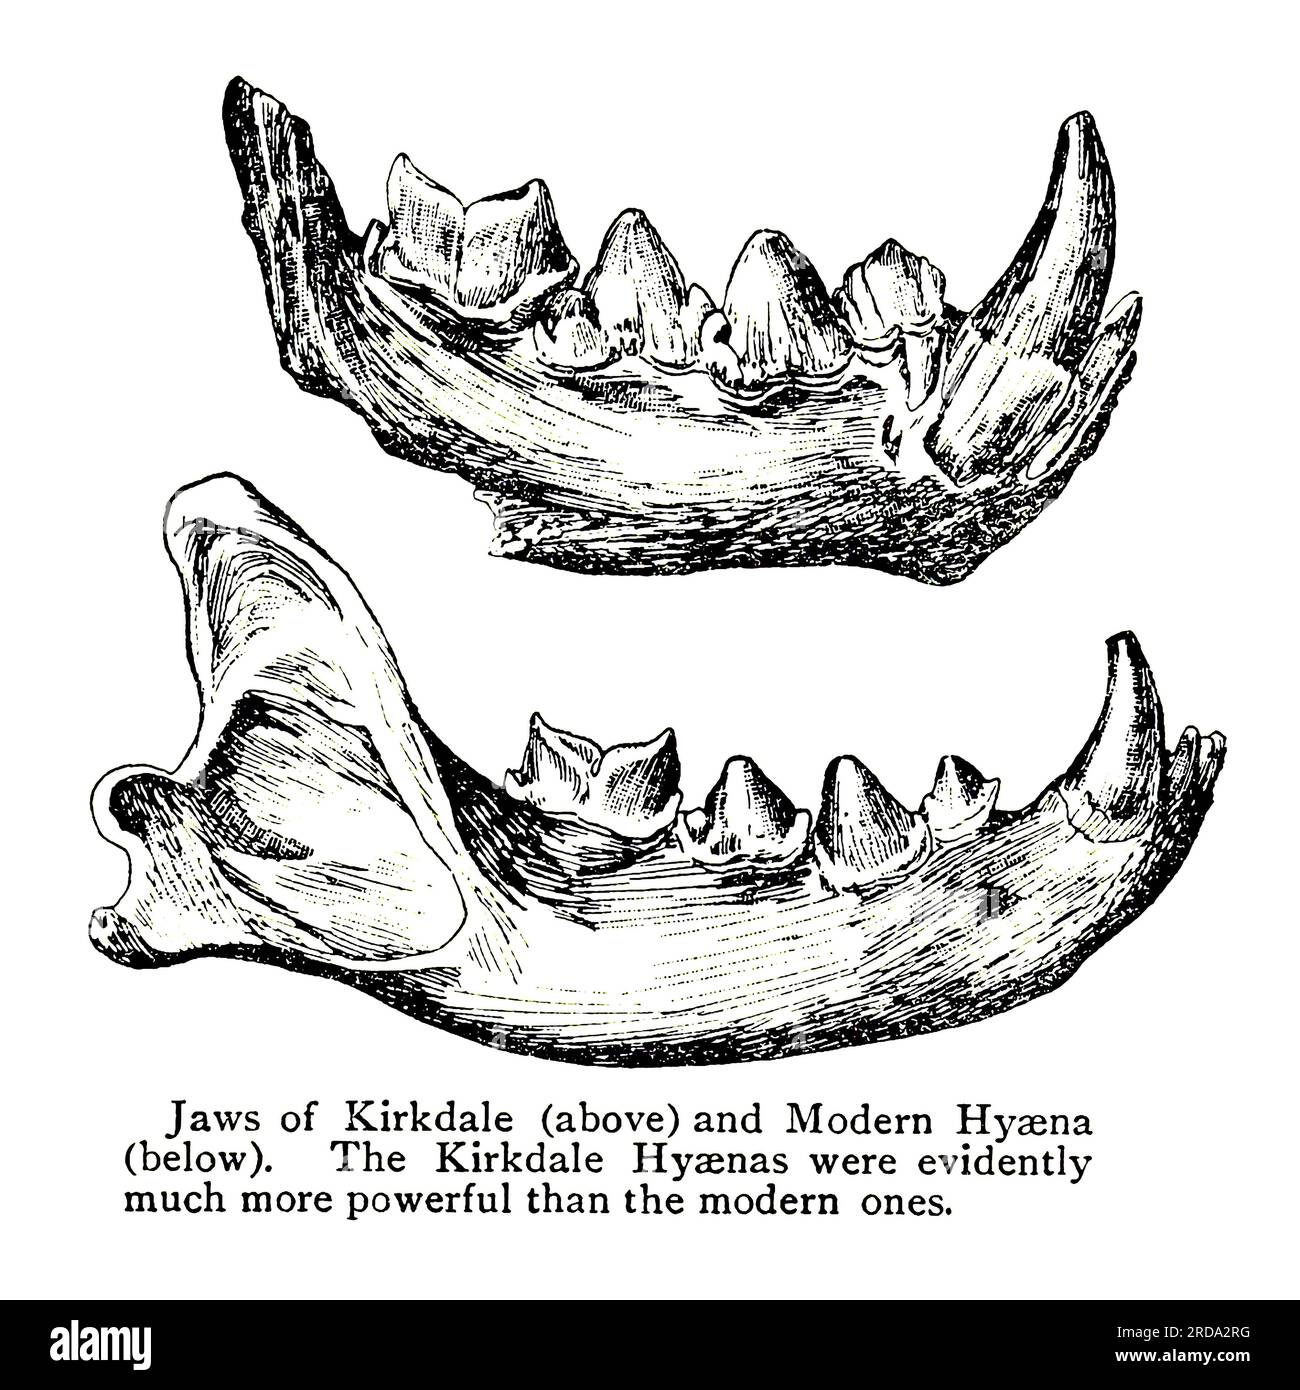 Jaws of Kirkdale (above) and Modern Hyaena The Kirkdale Hyaenas were evidently much more powerful than the modern ones from the book ' The evolution of an English town; being the story of the ancient town of Pickering in Yorkshire, from prehistoric times up to the year of our Lord nineteen hundred & 5 ' by Gordon Home, Publisher London, J.M. Dent & co.; New York, E.P. Dutton & co. 1905 Stock Photo